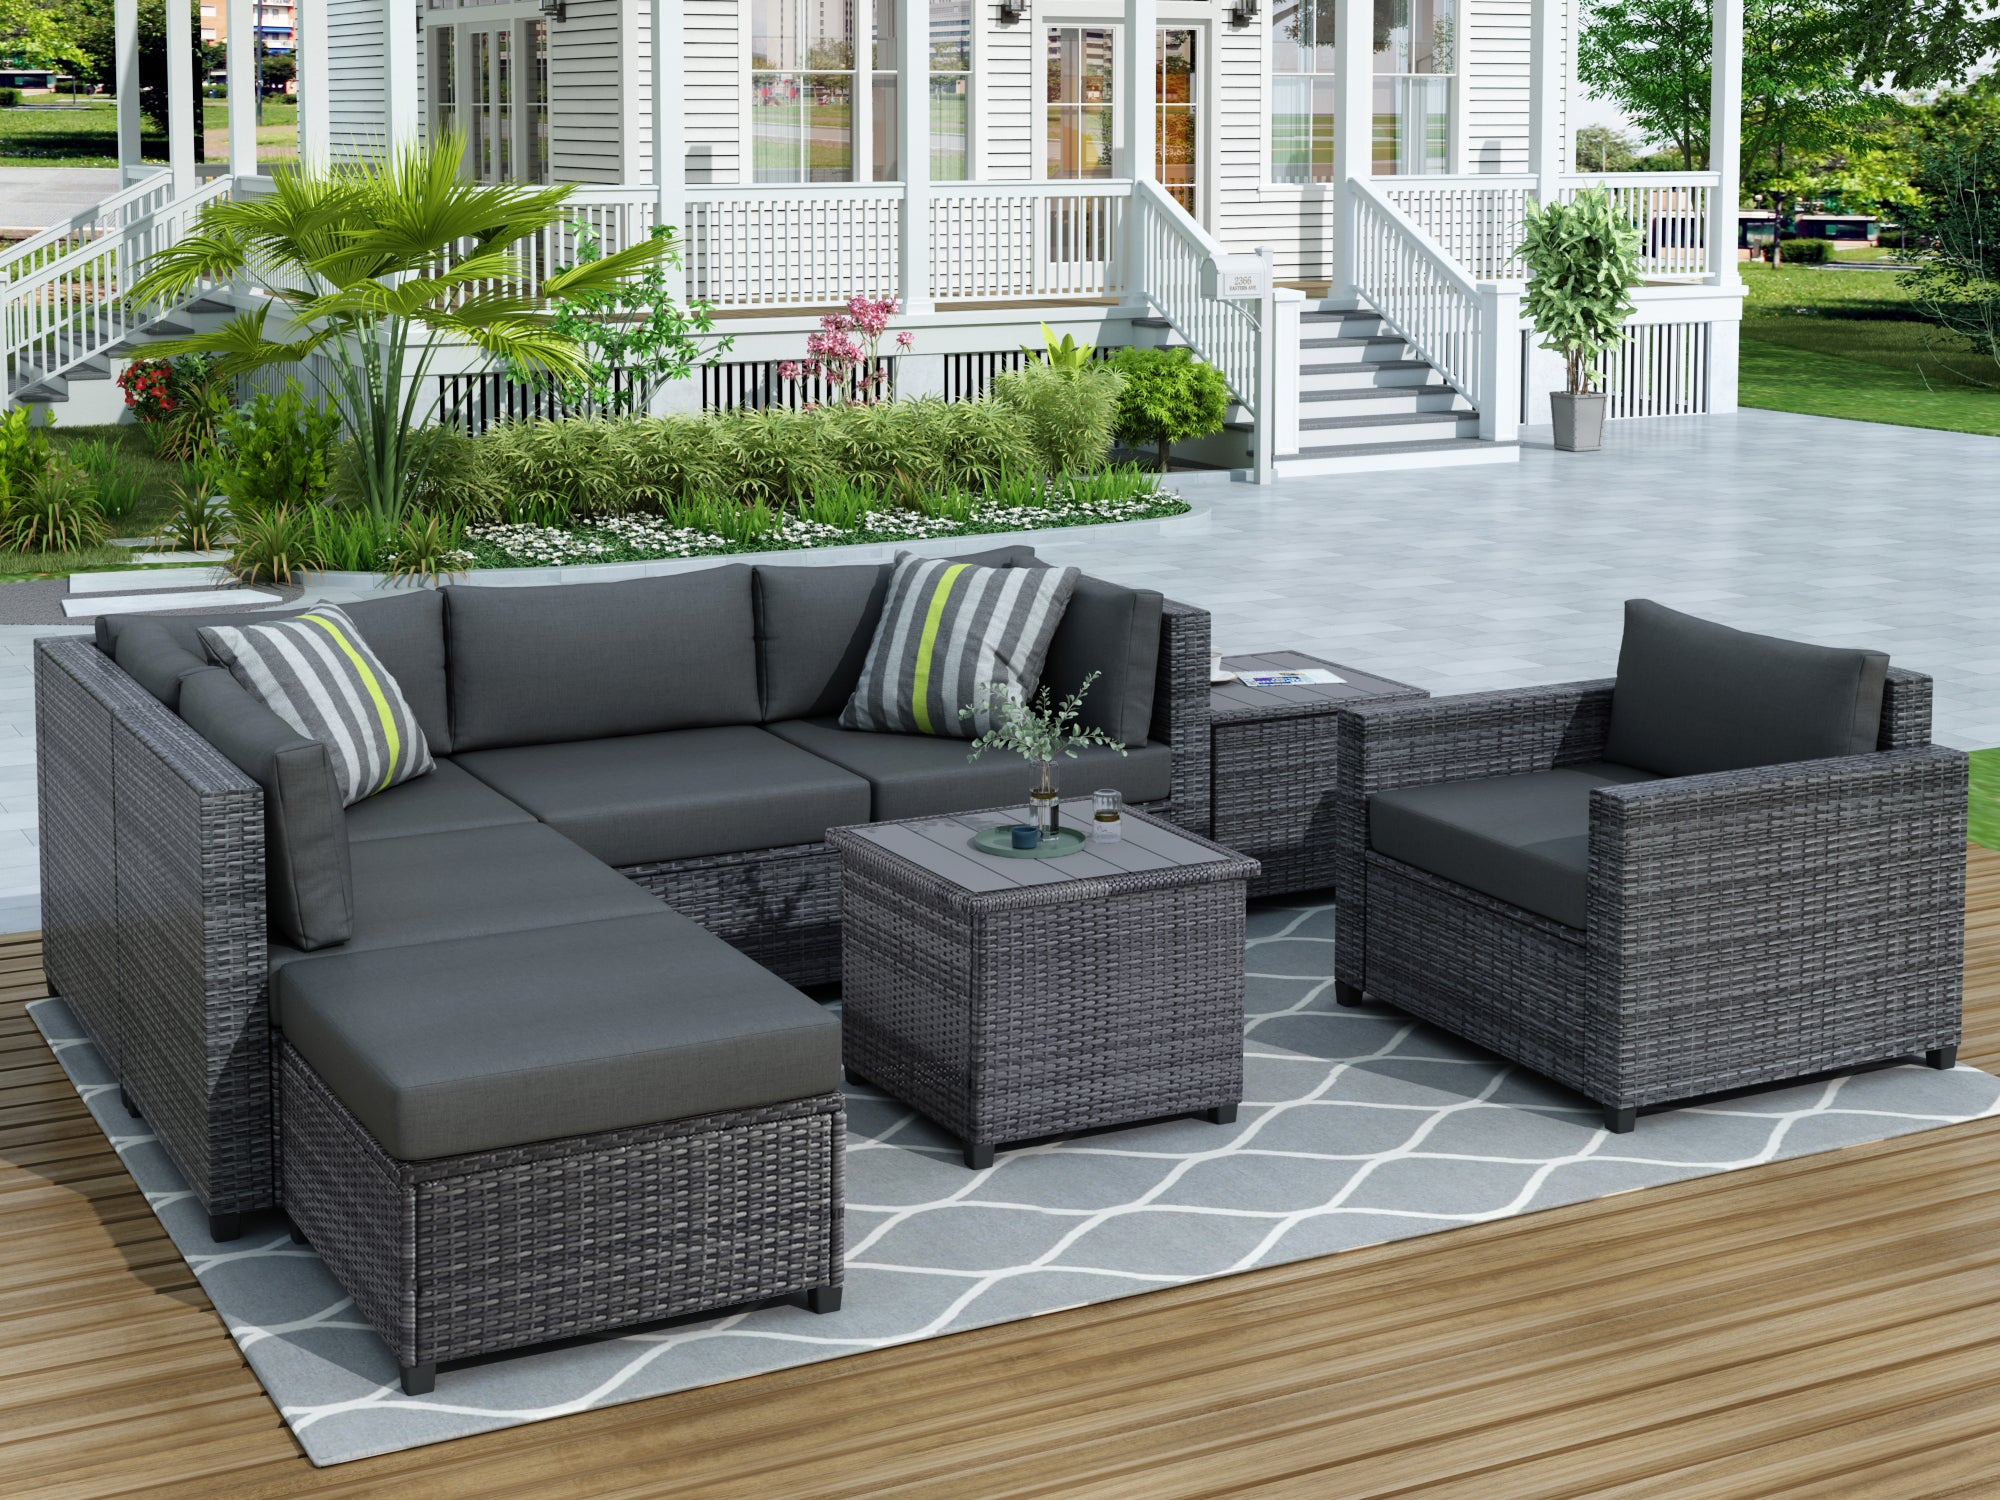 8 Piece Rattan Sectional Seating Group with Cushions Patio Furniture Sets (Gray)